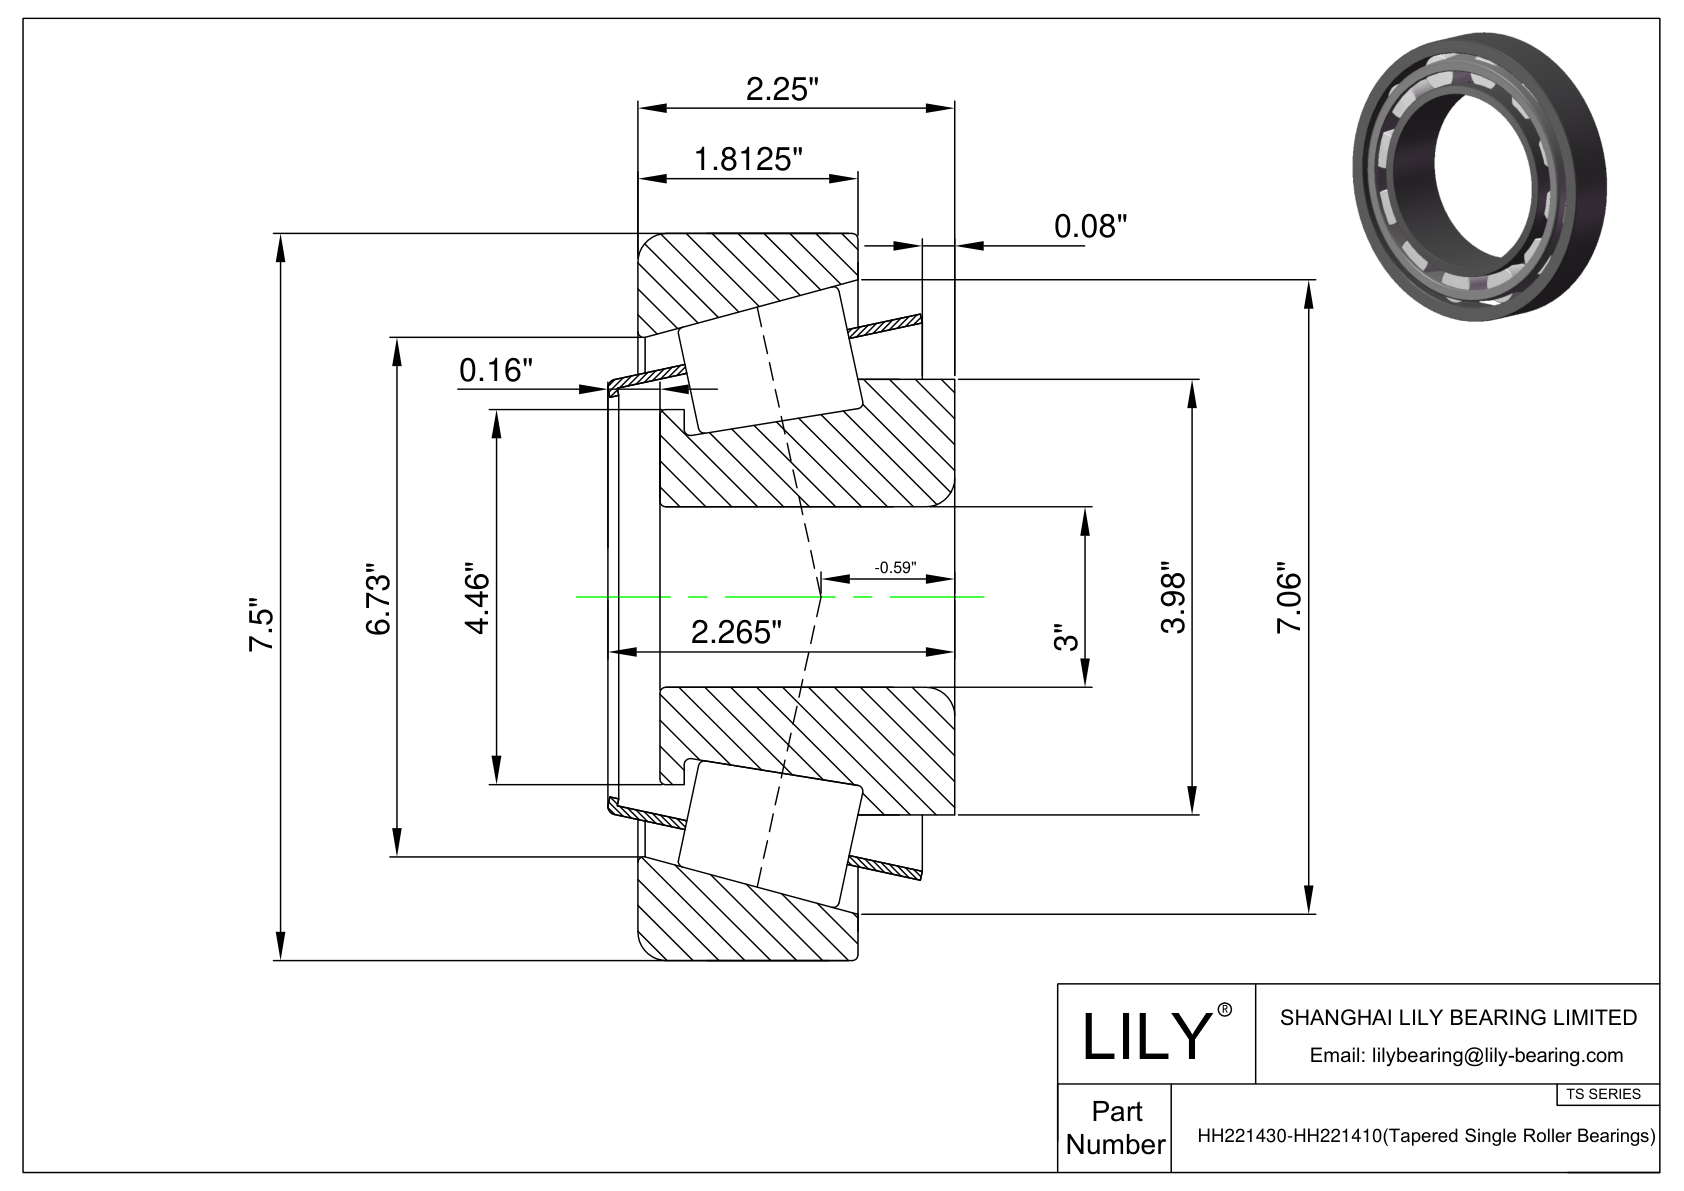 HH221430-HH221410 TS (Tapered Single Roller Bearings) (Imperial) cad drawing